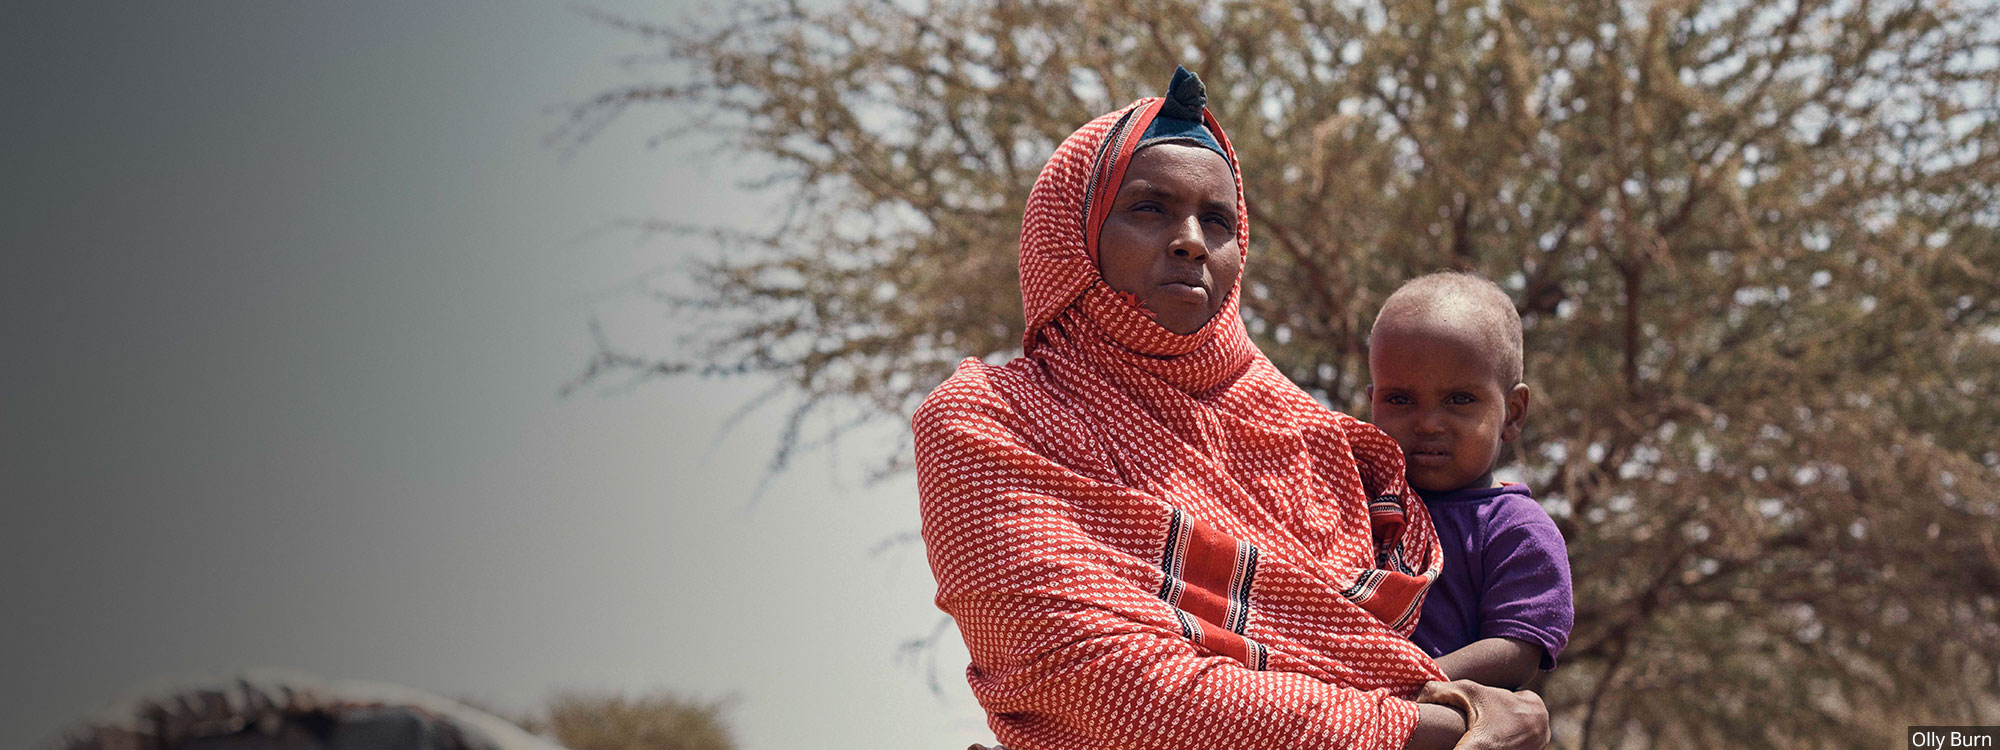 Somaliland woman in red headscarf holding child by olly burn